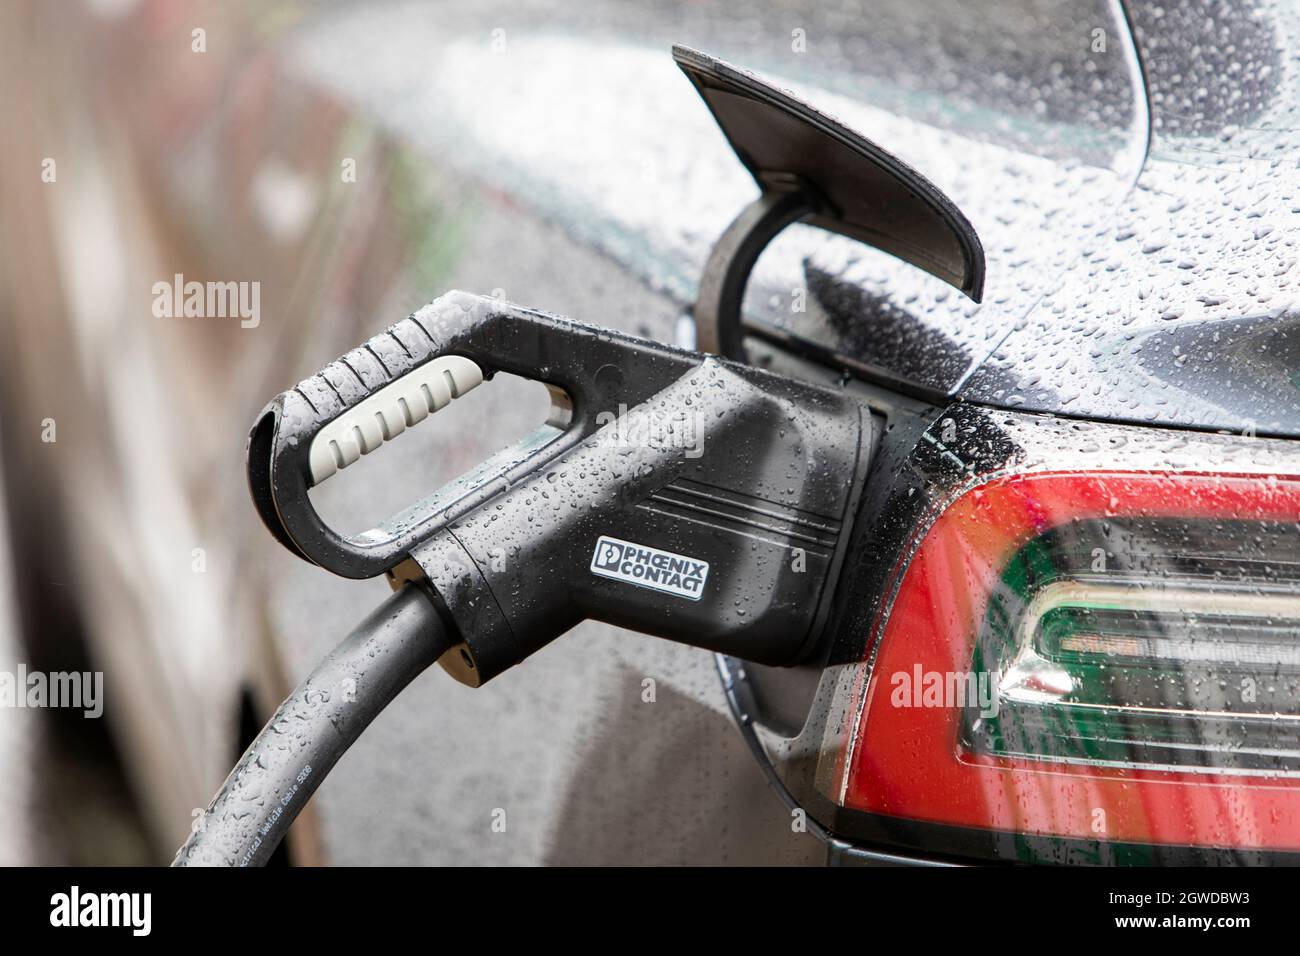 An Electric Vehicle recharging curbside in the centre of Manchester, UK. Stock Photo